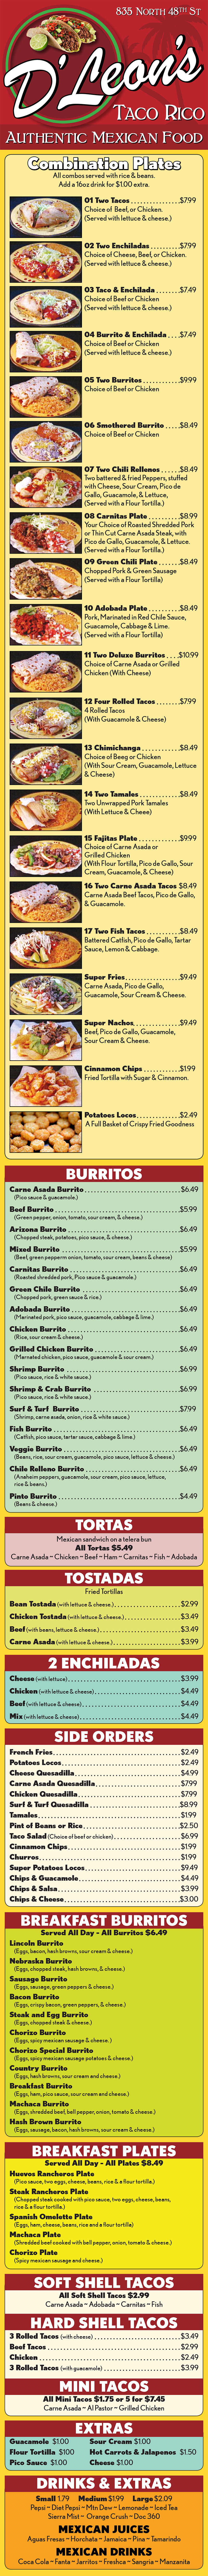 
835 North 48th Street
FULL MENU WITH REAL PRICES! 
  Combination Plates
All combos served with rice & beans.
Add a 16oz drink for $1.00 extra.
01 Two Tacos $7.99
Choice of Beef, or Chicken.
(Served with lettuce & cheese.)
02 Two Enchiladas $7.99
Choice of Cheese, Beef, or Chicken.
(Served with lettuce & cheese.)
03 Taco & Enchilada $7.49
Choice of Beef or Chicken
(Served with lettuce & cheese.)
04 Burrito & Enchilada $7.49
Choice of Beef or Chicken
(Served with lettuce & cheese.)
05 Two Burritos $9.99
Choice of Beef or Chicken
06 Smothered Burrito $8.49
Choice of Beef or Chicken
07 Two Chili Rellenos $8.49
Two battered & fried Peppers, stuffed
with Cheese, Sour Cream, Pico de
Gallo, Guacamole, & Lettuce,
(Served with a Flour Tortilla.)
08 Carnitas Plate $8.99
Your Choice of Roasted Shredded Pork
or Thin Cut Carne Asada Steak, with
Pico de Gallo, Guacamole, & Lettuce.
(Served with a Flour Tortilla.)
09 Green Chili Plate $8.49
Chopped Pork & Green Sausage
(Served with a Flour Tortilla)
10 Adobada Plate $8.49
Pork, Marinated in Red Chile Sauce,
Guacamole, Cabbage & Lime.
(Served with a Flour Tortilla)
11 Two Deluxe Burritos $10.99
Choice of Carne Asada or Grilled
Chicken (With Cheese)
12 Four Rolled Tacos $7.99
4 Rolled Tacos
(With Guacamole & Cheese)
13 Chimichanga $8.49
Choice of Beeg or Chicken
(With Sour Cream, Guacamole, Lettuce
& Cheese)
14 Two Tamales $8.49
Two Unwrapped Pork Tamales
(With Lettuce & Cheee)
15 Fajitas Plate $9.99
Choice of Carne Asada or
Grilled Chicken
(With Flour Tortilla, Pico de Gallo, Sour
Cream, Guacamole, & Cheese)
16 Two Carne Asada Tacos $8.49
Carne Asada Beef Tacos, Pico de Gallo,
& Guacamole.
17 Two Fish Tacos $8.49
Battered Catfish, Pico de Gallo, Tartar
Sauce, Lemon & Cabbage.
Super Fries $9.49
Carne Asada, Pico de Gallo,
Guacamole, Sour Cream & Cheese.
Super Nachos $9.49
Beef, Pico de Gallo, Guacamole,
Sour Cream & Cheese.
Cinnamon Chips $1.99
Fried Tortilla with Sugar & Cinnamon.
Potatoes Locos $2.49
A Full Basket of Crispy Fried Goodness
BURRITOS
Carne Asada Burrito $6.49
(Pico sauce & guacamole.)
Beef Burrito $5.99
(Green pepper, onion, tomato, sour cream, & cheese.)
Arizona Burrito $6.49
(Chopped steak, potatoes, pico sauce, & cheese.)
Mixed Burrito $5.99
(Beef, green pepperm onion, tomato, sour cream, beans & cheese)
Carnitas Burrito $6.49
(Roasted shredded pork, Pico sauce & guacamole.)
Green Chile Burrito $6.49
(Chopped pork, green sauce & rice.)
Adobada Burrito $6.49
(Marinated pork, pico sauce, guacamole, cabbage & lime.)
Chicken Burrito $6.49
(Rice, sour cream & cheese.)
Grilled Chicken Burrito $6.49
(Marnated chicken, pico sauce, guacamole & sour cream.)
Shrimp Burrito $6.99
(Pico sauce, rice & white sauce.)
Shrimp & Crab Burrito $6.99
(Pico sauce, rice & white sauce.)
Surf & Turf Burrito $7.99
(Shrimp, carne asada, onion, rice & white sauce.)
Fish Burrito $6.49
(Catfish, pico sauce, tartar sauce, cabbage & lime.)
Veggie Burrito $6.49
(Beans, rice, sour cream, guacamole, pico sauce, lettuce & cheese.)
Chile Relleno Burrito $6.49
(Anaheim peppers, guacamole, sour cream, pico sauce, lettuce,
rice & beans.)
Pinto Burrito $4.49
(Beans & cheese.)
TORTAS
Mexican sandwich on a telera bun
All Tortas $5.49
Carne Asada ~ Chicken ~ Beef ~ Ham ~ Carnitas ~ Fish ~ Adobada
TOSTADAS
Fried Tortillas
Bean Tostada (with lettuce & cheese.) $2.99
Chicken Tostada (with lettuce & cheese.) $3.49
Beef (with beans, lettuce & cheese.) $3.49
Carne Asada (with lettuce & cheese.) $3.99
2 ENCHILADAS
Cheese (with lettuce) $3.99
Chicken (with lettuce & cheese) $4.49
Beef (with lettuce & cheese) $4.49
Mix (with lettuce & cheese) $4.49
SIDE ORDERS
French Fries $2.49
Potatoes Locos $2.49
Cheese Quesadilla $4.99
Carne Asada Quesadilla $7.99
Chicken Quesadilla $7.99
Surf & Turf Quesadilla $8.99
Tamales $1.99
Pint of Beans or Rice $2.50
Taco Salad (Choice of beef or chicken) $6.99
Cinnamon Chips $1.99
Churros $1.99
Super Potatoes Locos $9.49
Chips & Guacamole $4.49
Chips & Salsa $3.99
Chips & Cheese $3.00
BREAKFAST BURRITOS
Served All Day - All Burritos $6.49
Lincoln Burrito
(Eggs, bacon, hash browns, sour cream & cheese.)
Nebraska Burrito
(Eggs, chopped steak, hash browns, & cheese.)
Sausage Burrito
(Eggs, sausage, green peppers & cheese.)
Bacon Burrito
(Eggs, crispy bacon, green peppers, & cheese.)
Steak and Egg Burrito
(Eggs, chopped steak & cheese.)
Chorizo Burrito
(Eggs, spicy mexican sausage & cheese. )
Chorizo Special Burrito
(Eggs, spicy mexican sausage potatoes & cheese.)
Country Burrito
(Eggs, hash browns, sour cream and cheese.)
Breakfast Burrito
(Eggs, ham, pico sauce, sour cream and cheese.)
Machaca Burrito
(Eggs, shredded beef, bell pepper, onion, tomato & cheese.)
Hash Brown Burrito
(Eggs, sausage, bacon, hash browns, sour cream & cheese.)
BREAKFAST PLATES
Served All Day - All Plates $8.49
Huevos Rancheros Plate
(Pico sauce, two eggs, cheese, beans, rice & a flour tortilla.)
Steak Rancheros Plate
(Chopped steak cooked with pico sauce, two eggs, cheese, beans,
rice & a flour tortilla.)
Spanish Omelette Plate
(Eggs, ham, cheese, beans, rice and a flour tortilla)
Machaca Plate
(Shredded beef cooked with bell pepper, onion, tomato & cheese.)
Chorizo Plate
(Spicy mexican sausage and cheese.)
SOFT SHELL TACOS
All Soft Shell Tacos $2.99
Carne Asada ~ Adobada ~ Carnitas ~ Fish
HARD SHELL TACOS
3 Rolled Tacos (with cheese) $3.49
Beef Tacos $2.99
Chicken $2.49
3 Rolled Tacos (with guacamole) $3.99
MINI TACOS
All Mini Tacos $1.75 or 5 for $7.45
Carne Asada ~ Al Pastor ~ Grilled Chicken
EXTRAS
Guacamole $1.00 Sour Cream $1.00
Flour Tortilla $100 Hot Carrots & Jalapenos $1.50
Pico Sauce $1.00 Cheese $1.00
DRINKS & EXTRAS
Small 1.79 Medium $1.99 Large $2.09
Pepsi ~ Diet Pepsi ~ Mtn Dew ~ Lemonade ~ Iced Tea
Sierra Mist ~ Orange Crush ~ Doc 360
MEXICAN JUICES
Aguas Fresas ~ Horchata ~ Jamaica ~ Pina ~ Tamarindo
MEXICAN DRINKS
Coca Cola ~ Fanta ~ Jarritos ~ Freshca ~ Sangria ~ Manzanita
D’Leon’s
Get D'Leon's 835 North 48th Street delivery! Order online with Metro Dining Delivery and get great Mexican Food from D'Leon's delivered to your home or office FAST.
